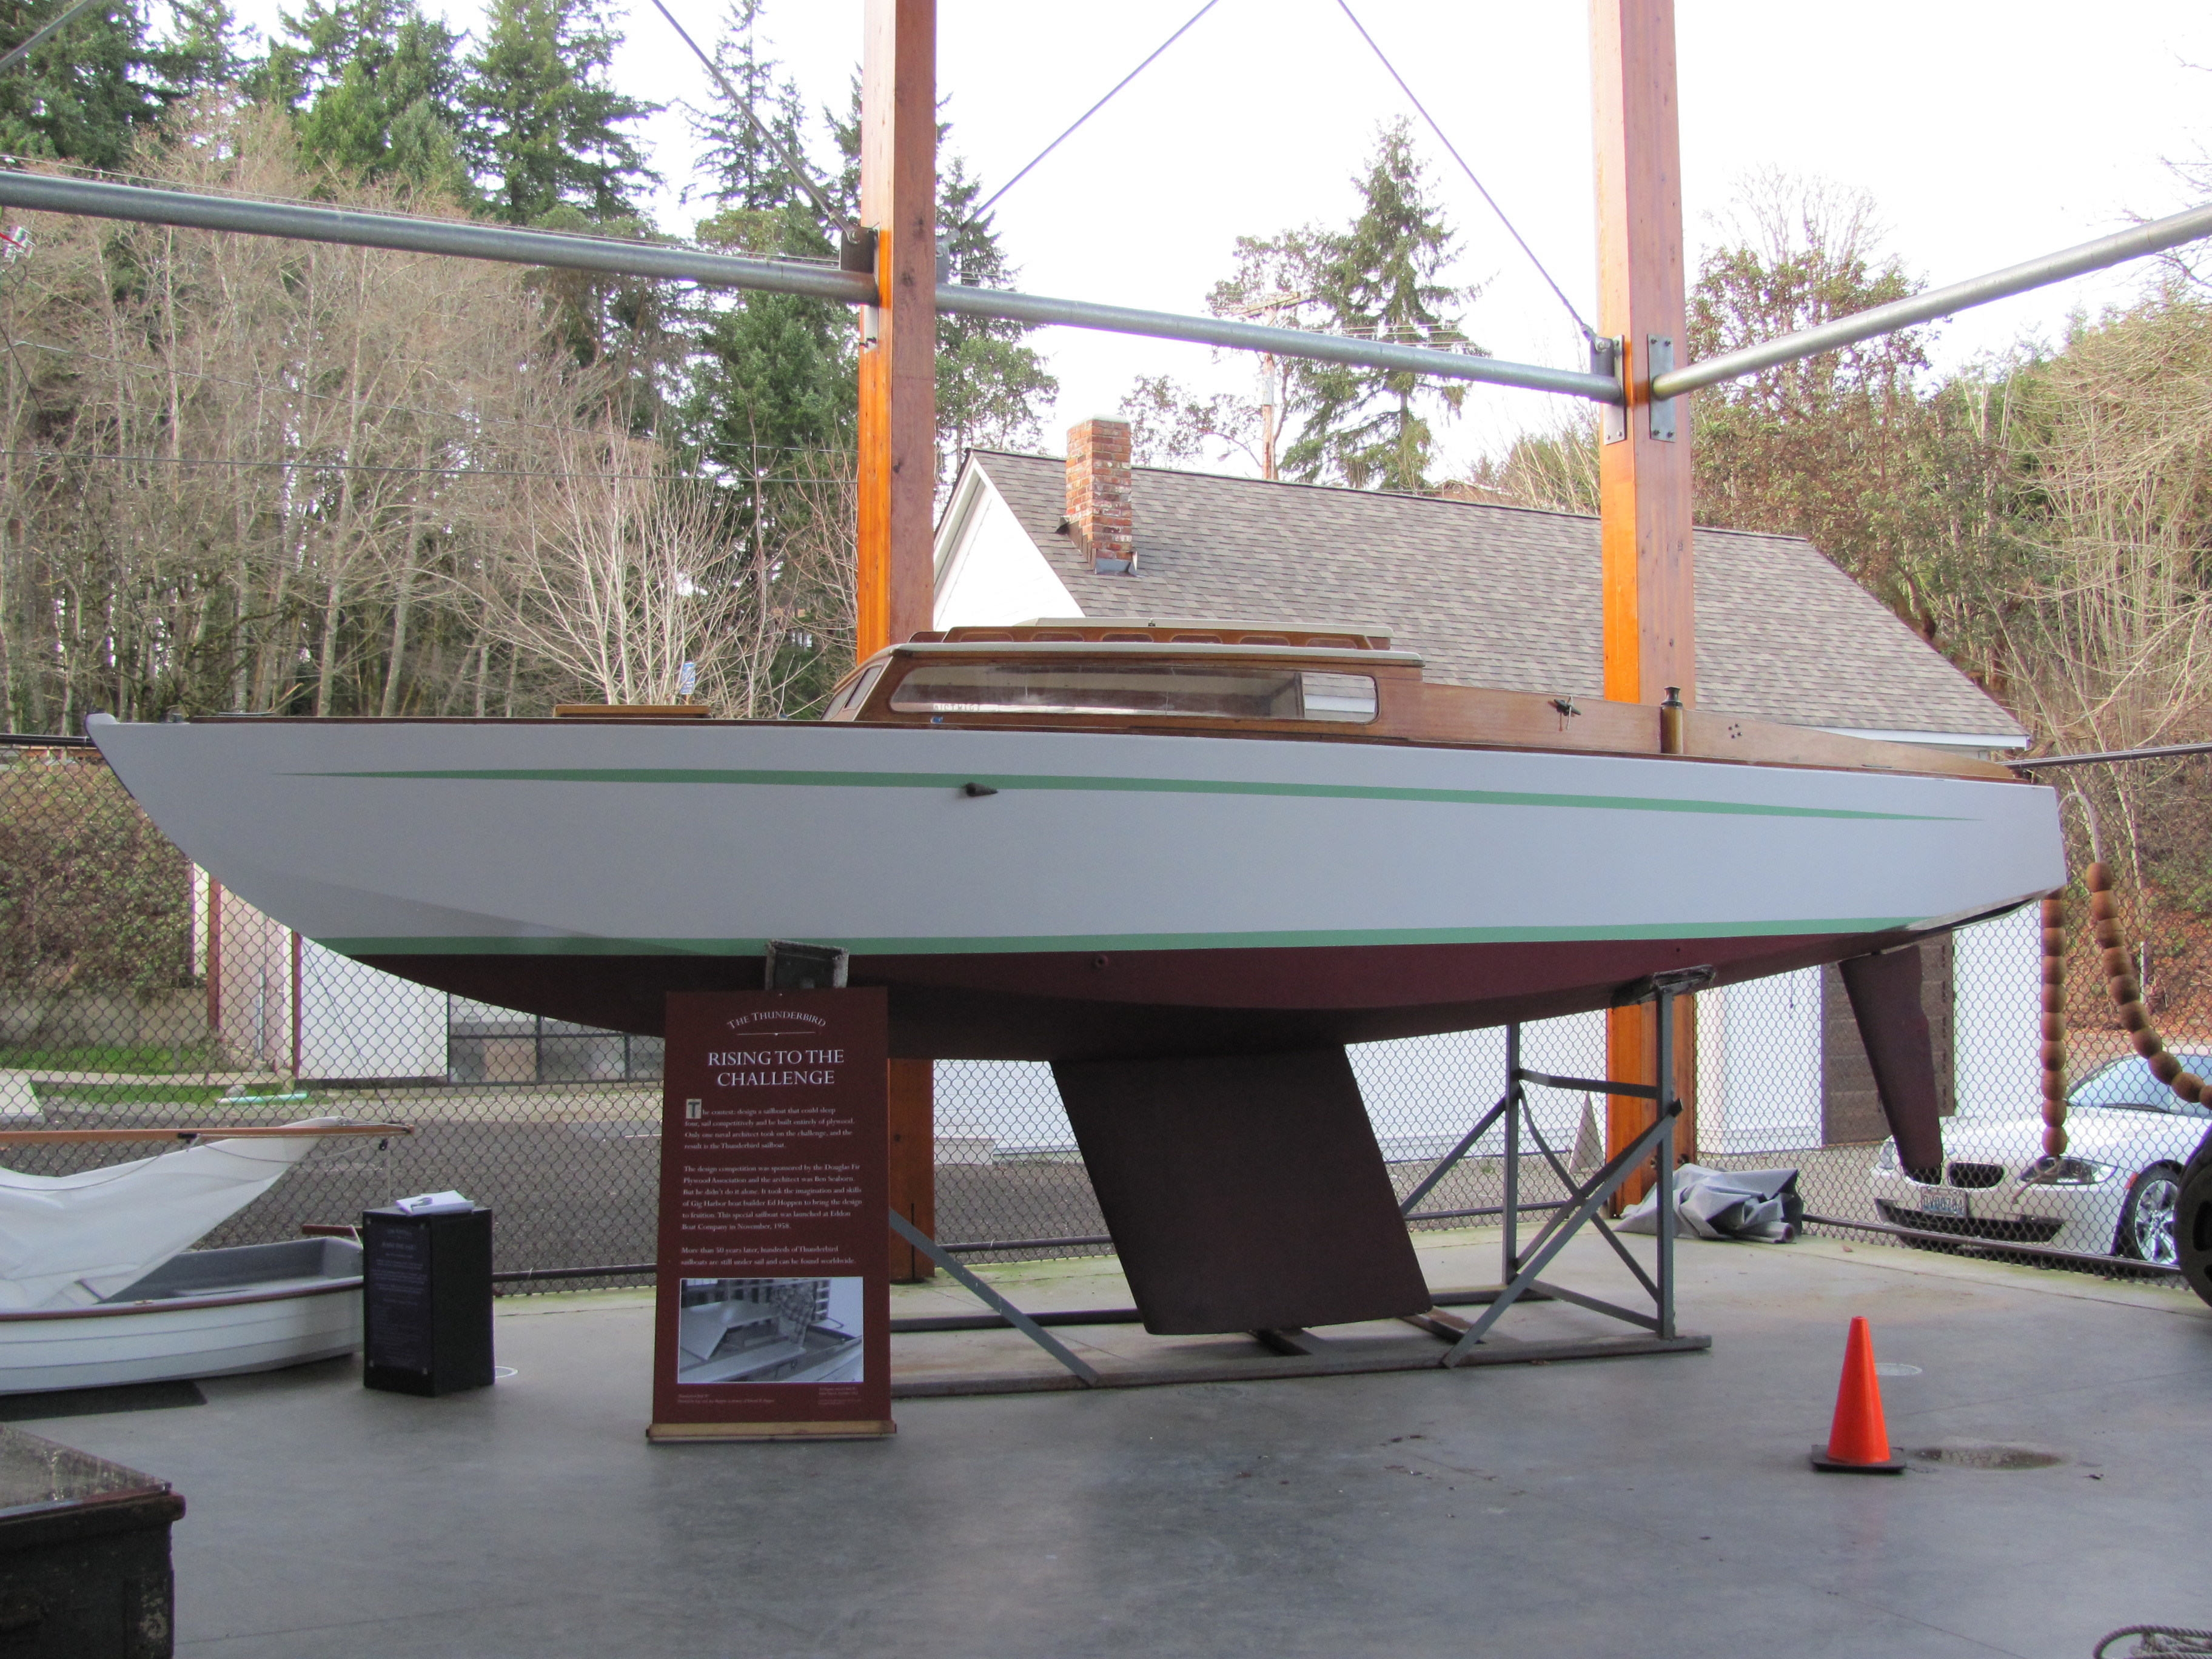 View of: Thunderbird Hull #1, designed by Ben Seaborn and built by Ed ...